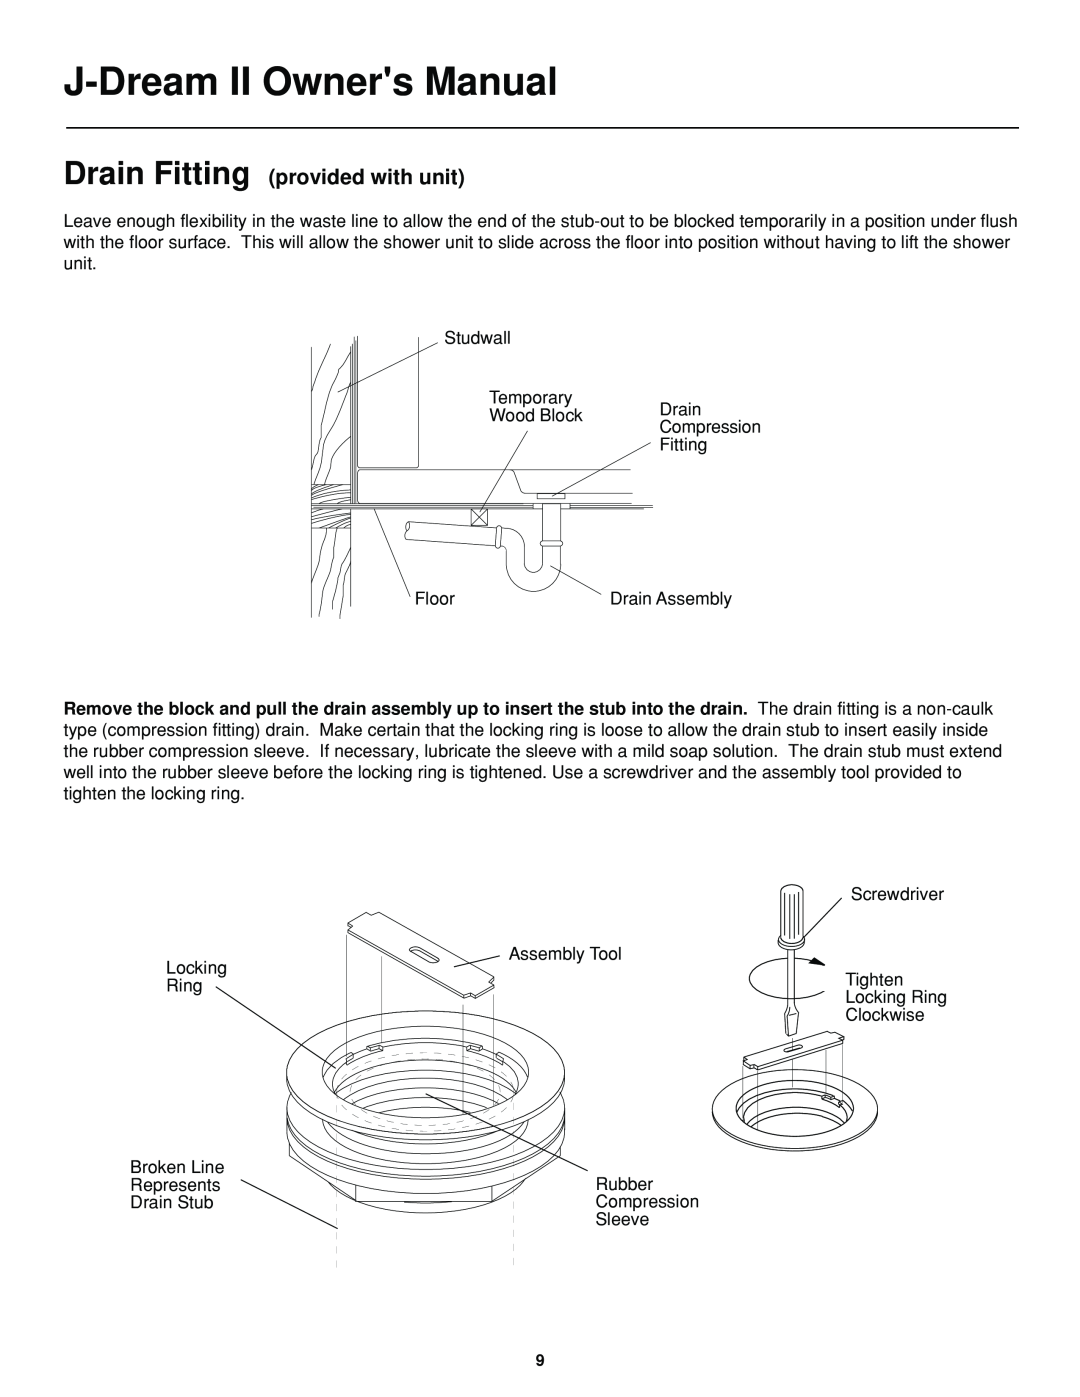 Jacuzzi J-DREAM II owner manual Drain Fitting provided with unit 